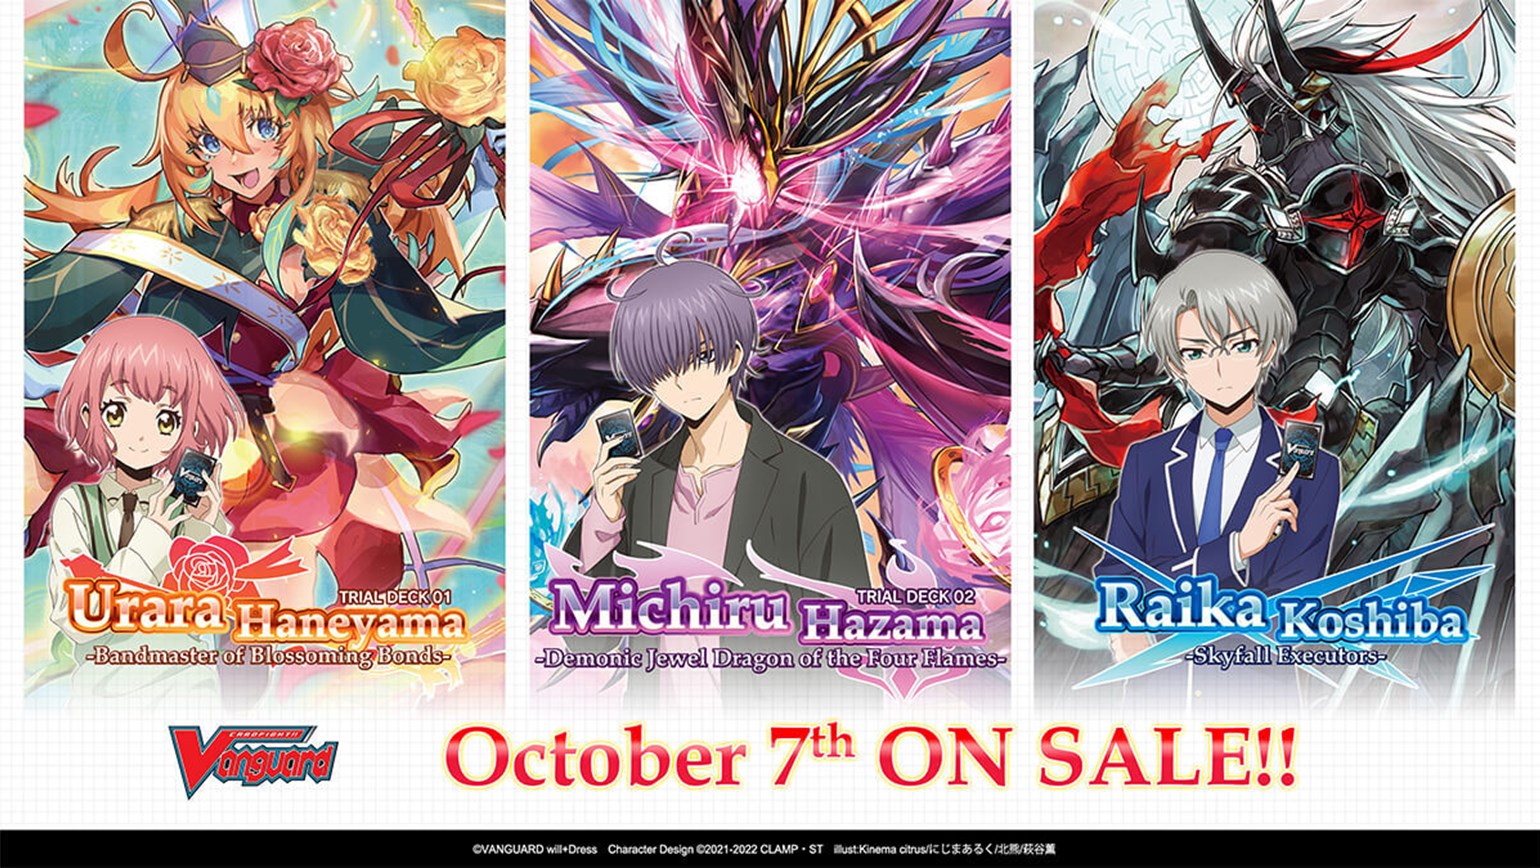 New English Edition Cardfight!! Vanguard Trial Decks are Coming to Stores on October 7th!